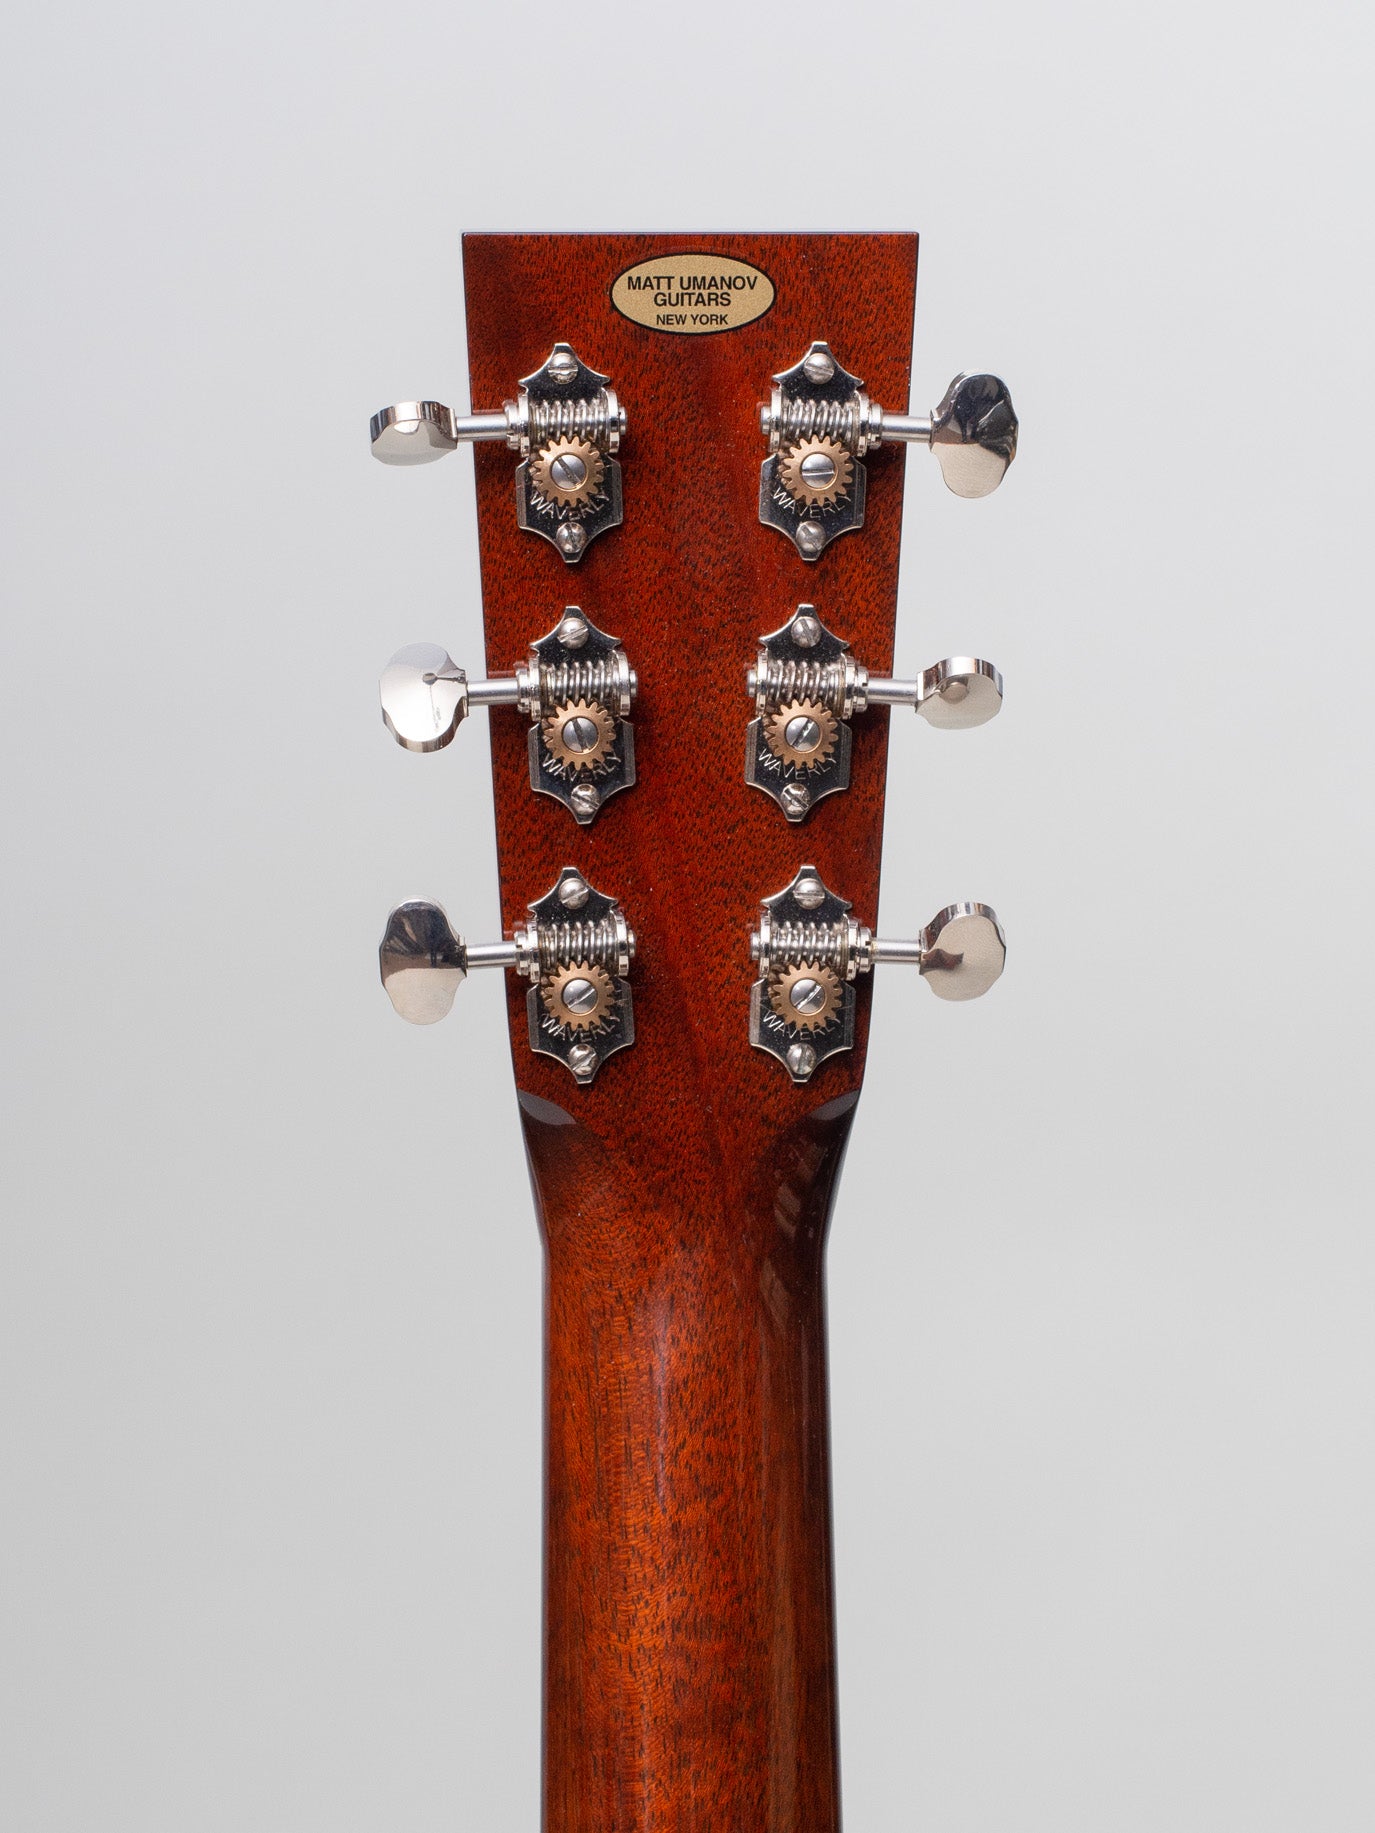 2014 Collings OM1A SN 23407